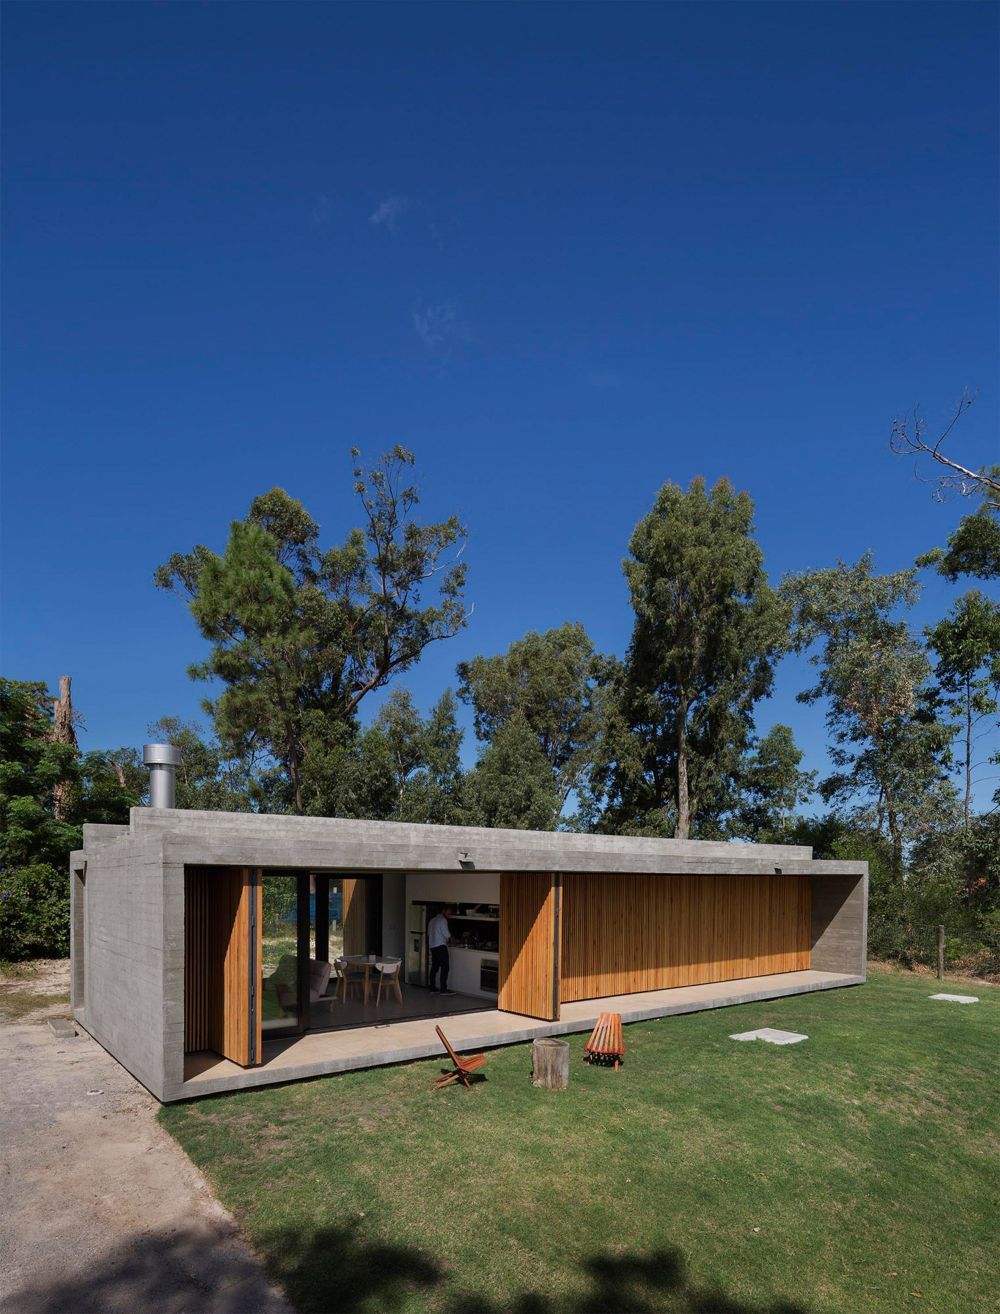 The house is long and rectangular and has a single level and a concrete shell